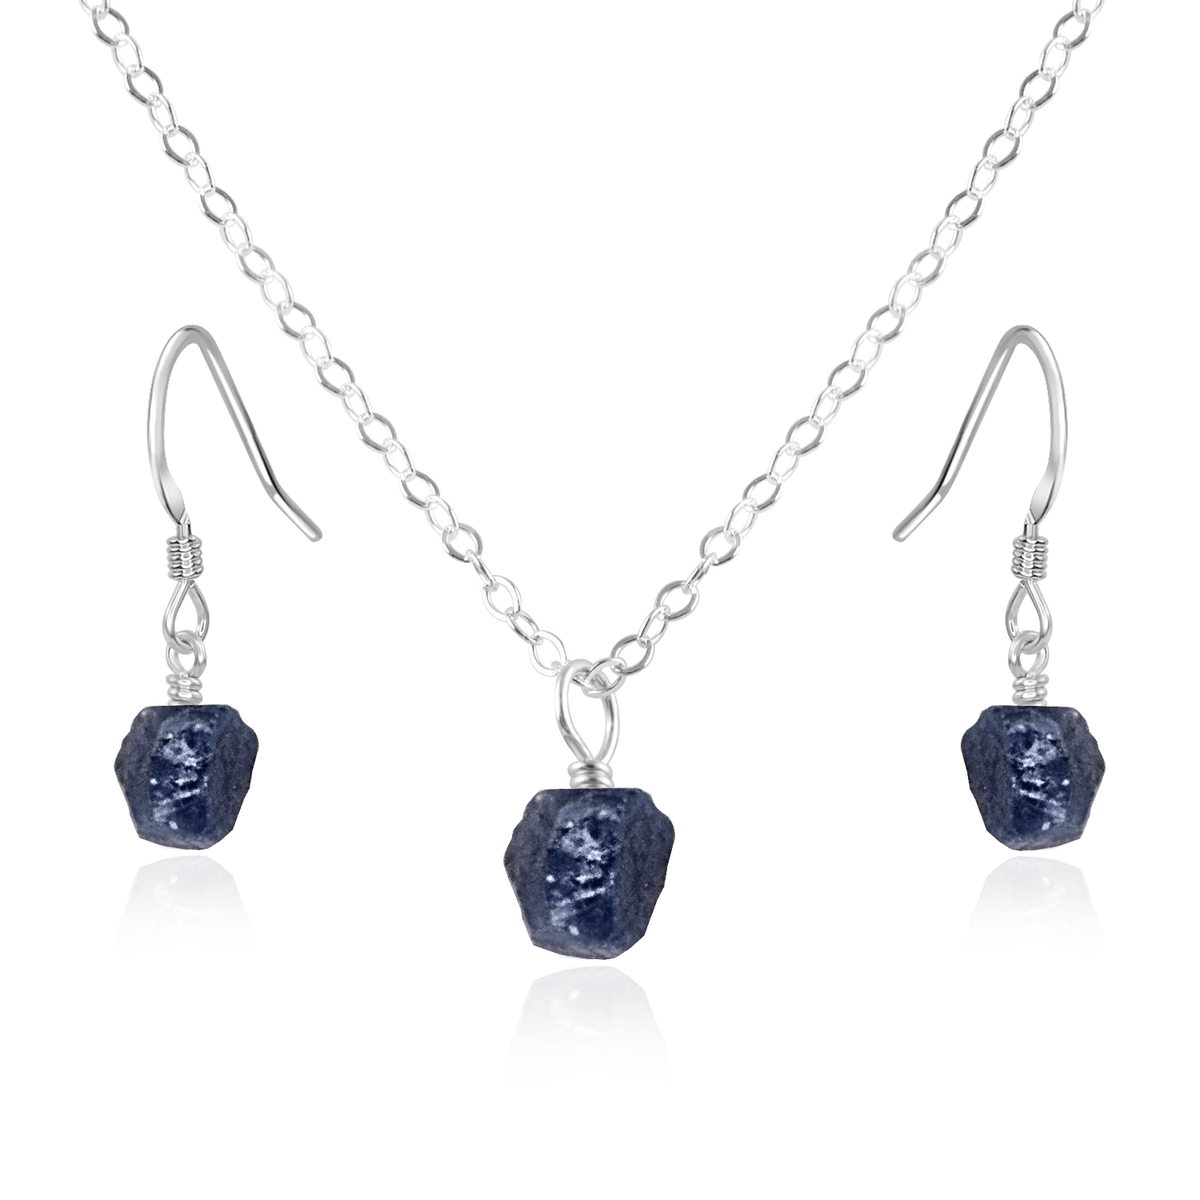 Raw Sapphire Crystal Earrings & Necklace Set - Raw Sapphire Crystal Earrings & Necklace Set - Sterling Silver / Cable - Luna Tide Handmade Crystal Jewellery